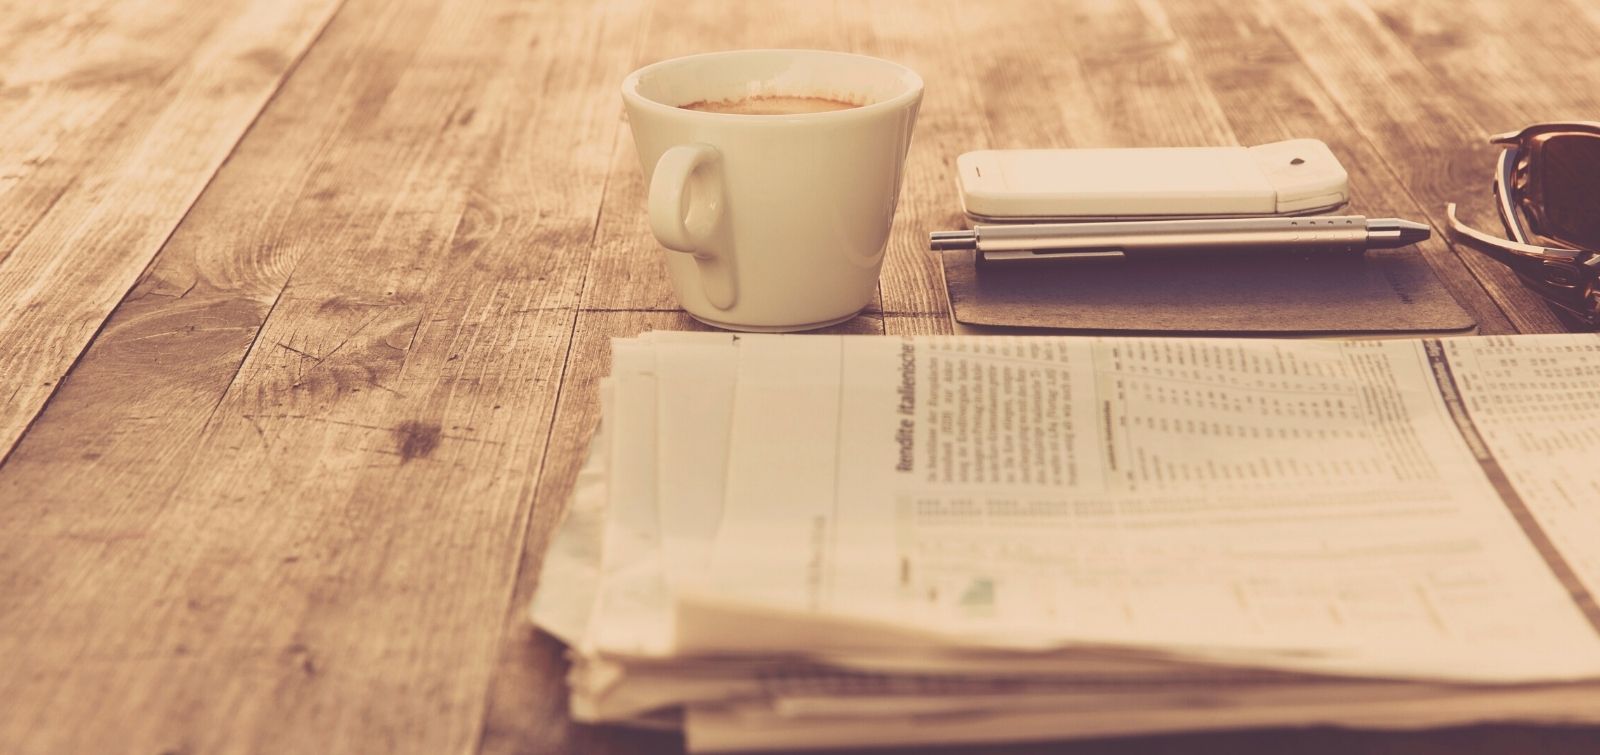 newspaper, coffee, and phone on tabletop